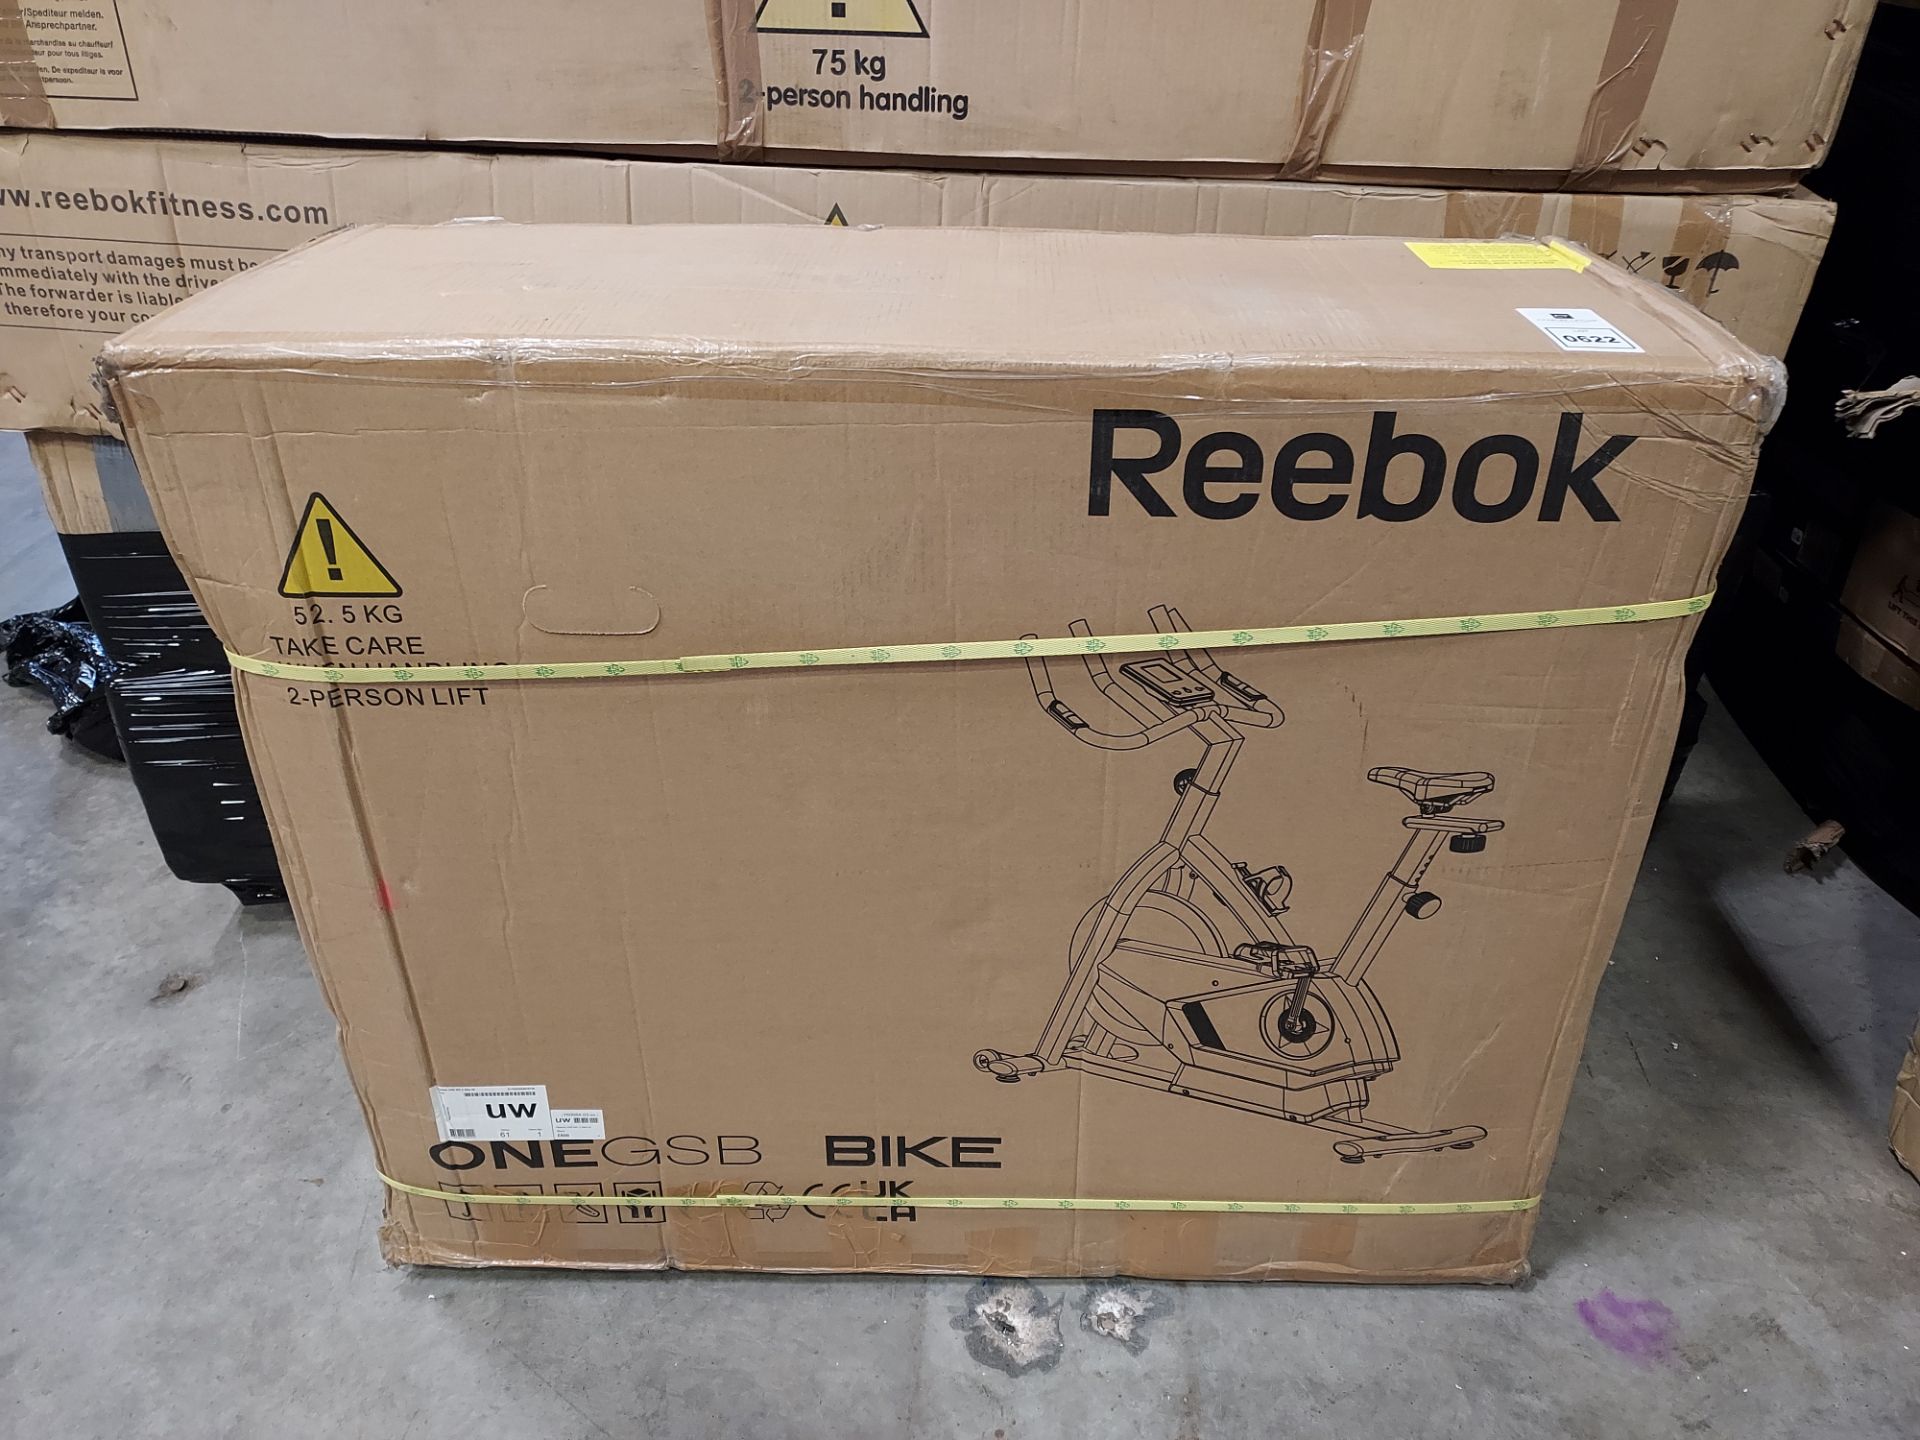 1 X BRAND NEW FACTORY SEALED REEBOK GSB IND X BIKE 00 IN BLACK GROSS WEIGHT 52.5 KGS IN BOX - Image 2 of 2